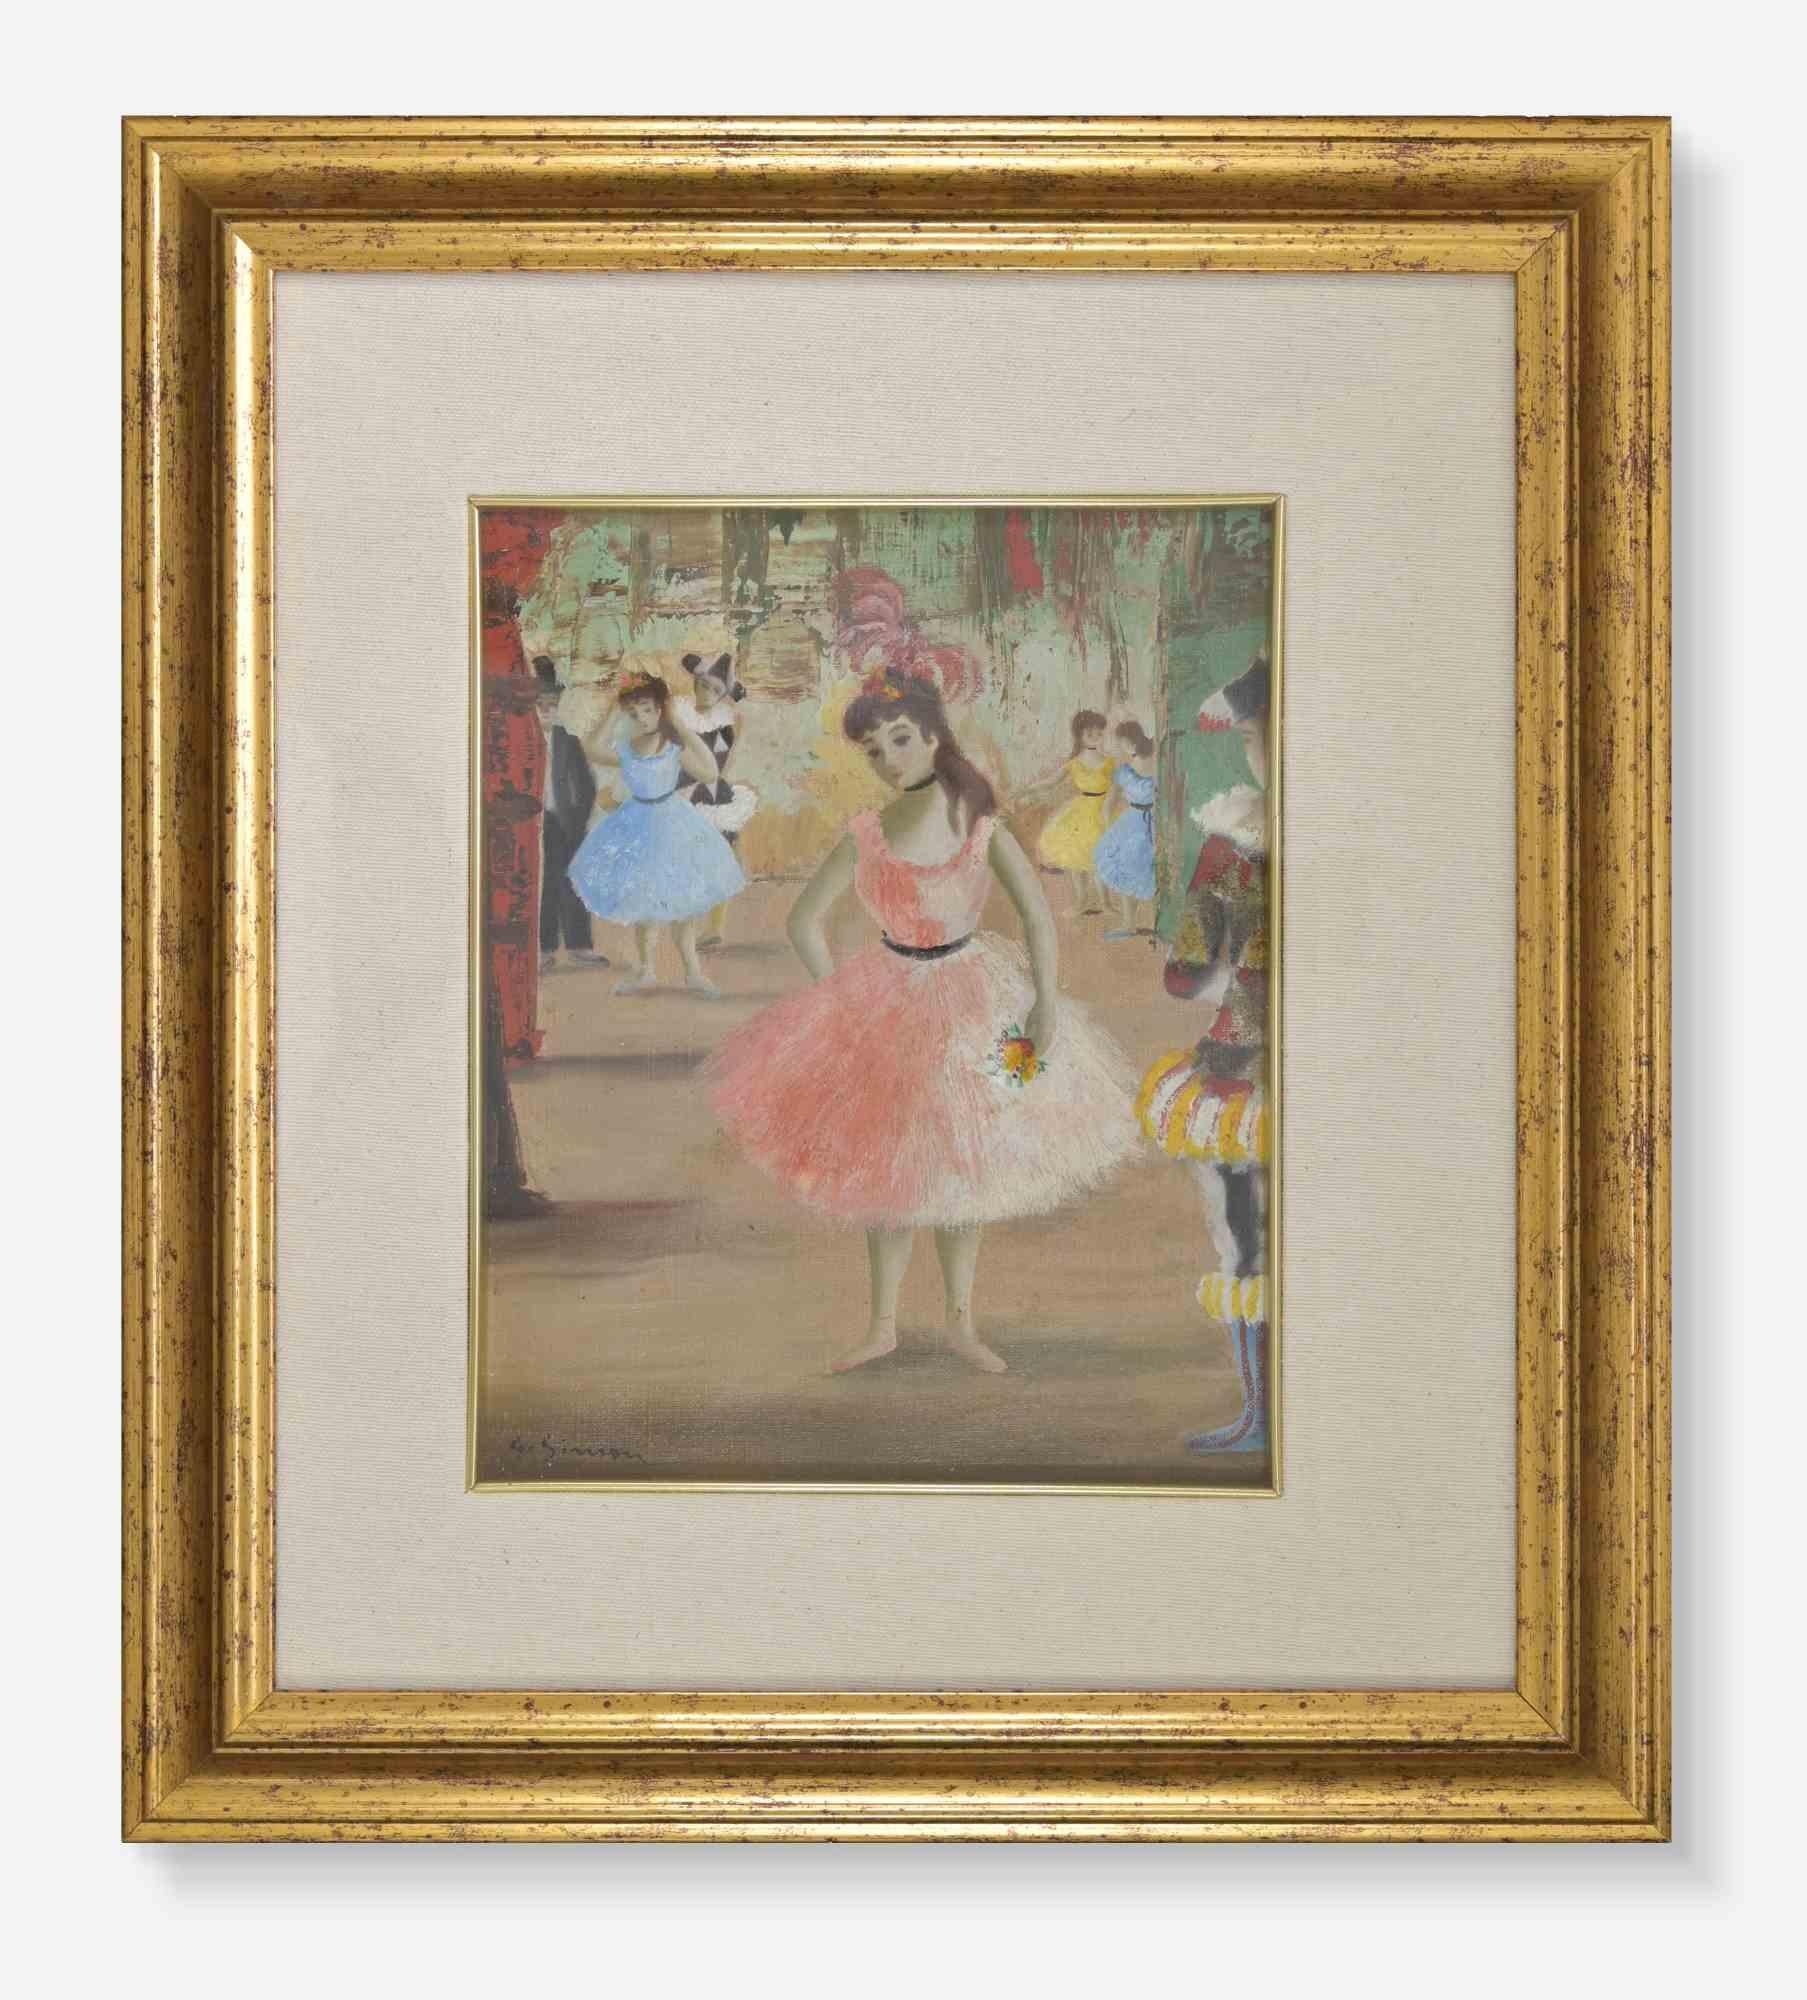 Dancer at the theater is an artwork realized by Simon Georgette in the early 20th century. 

Oil on canvas, 40 x 43 cm with frame.

Good conditions
